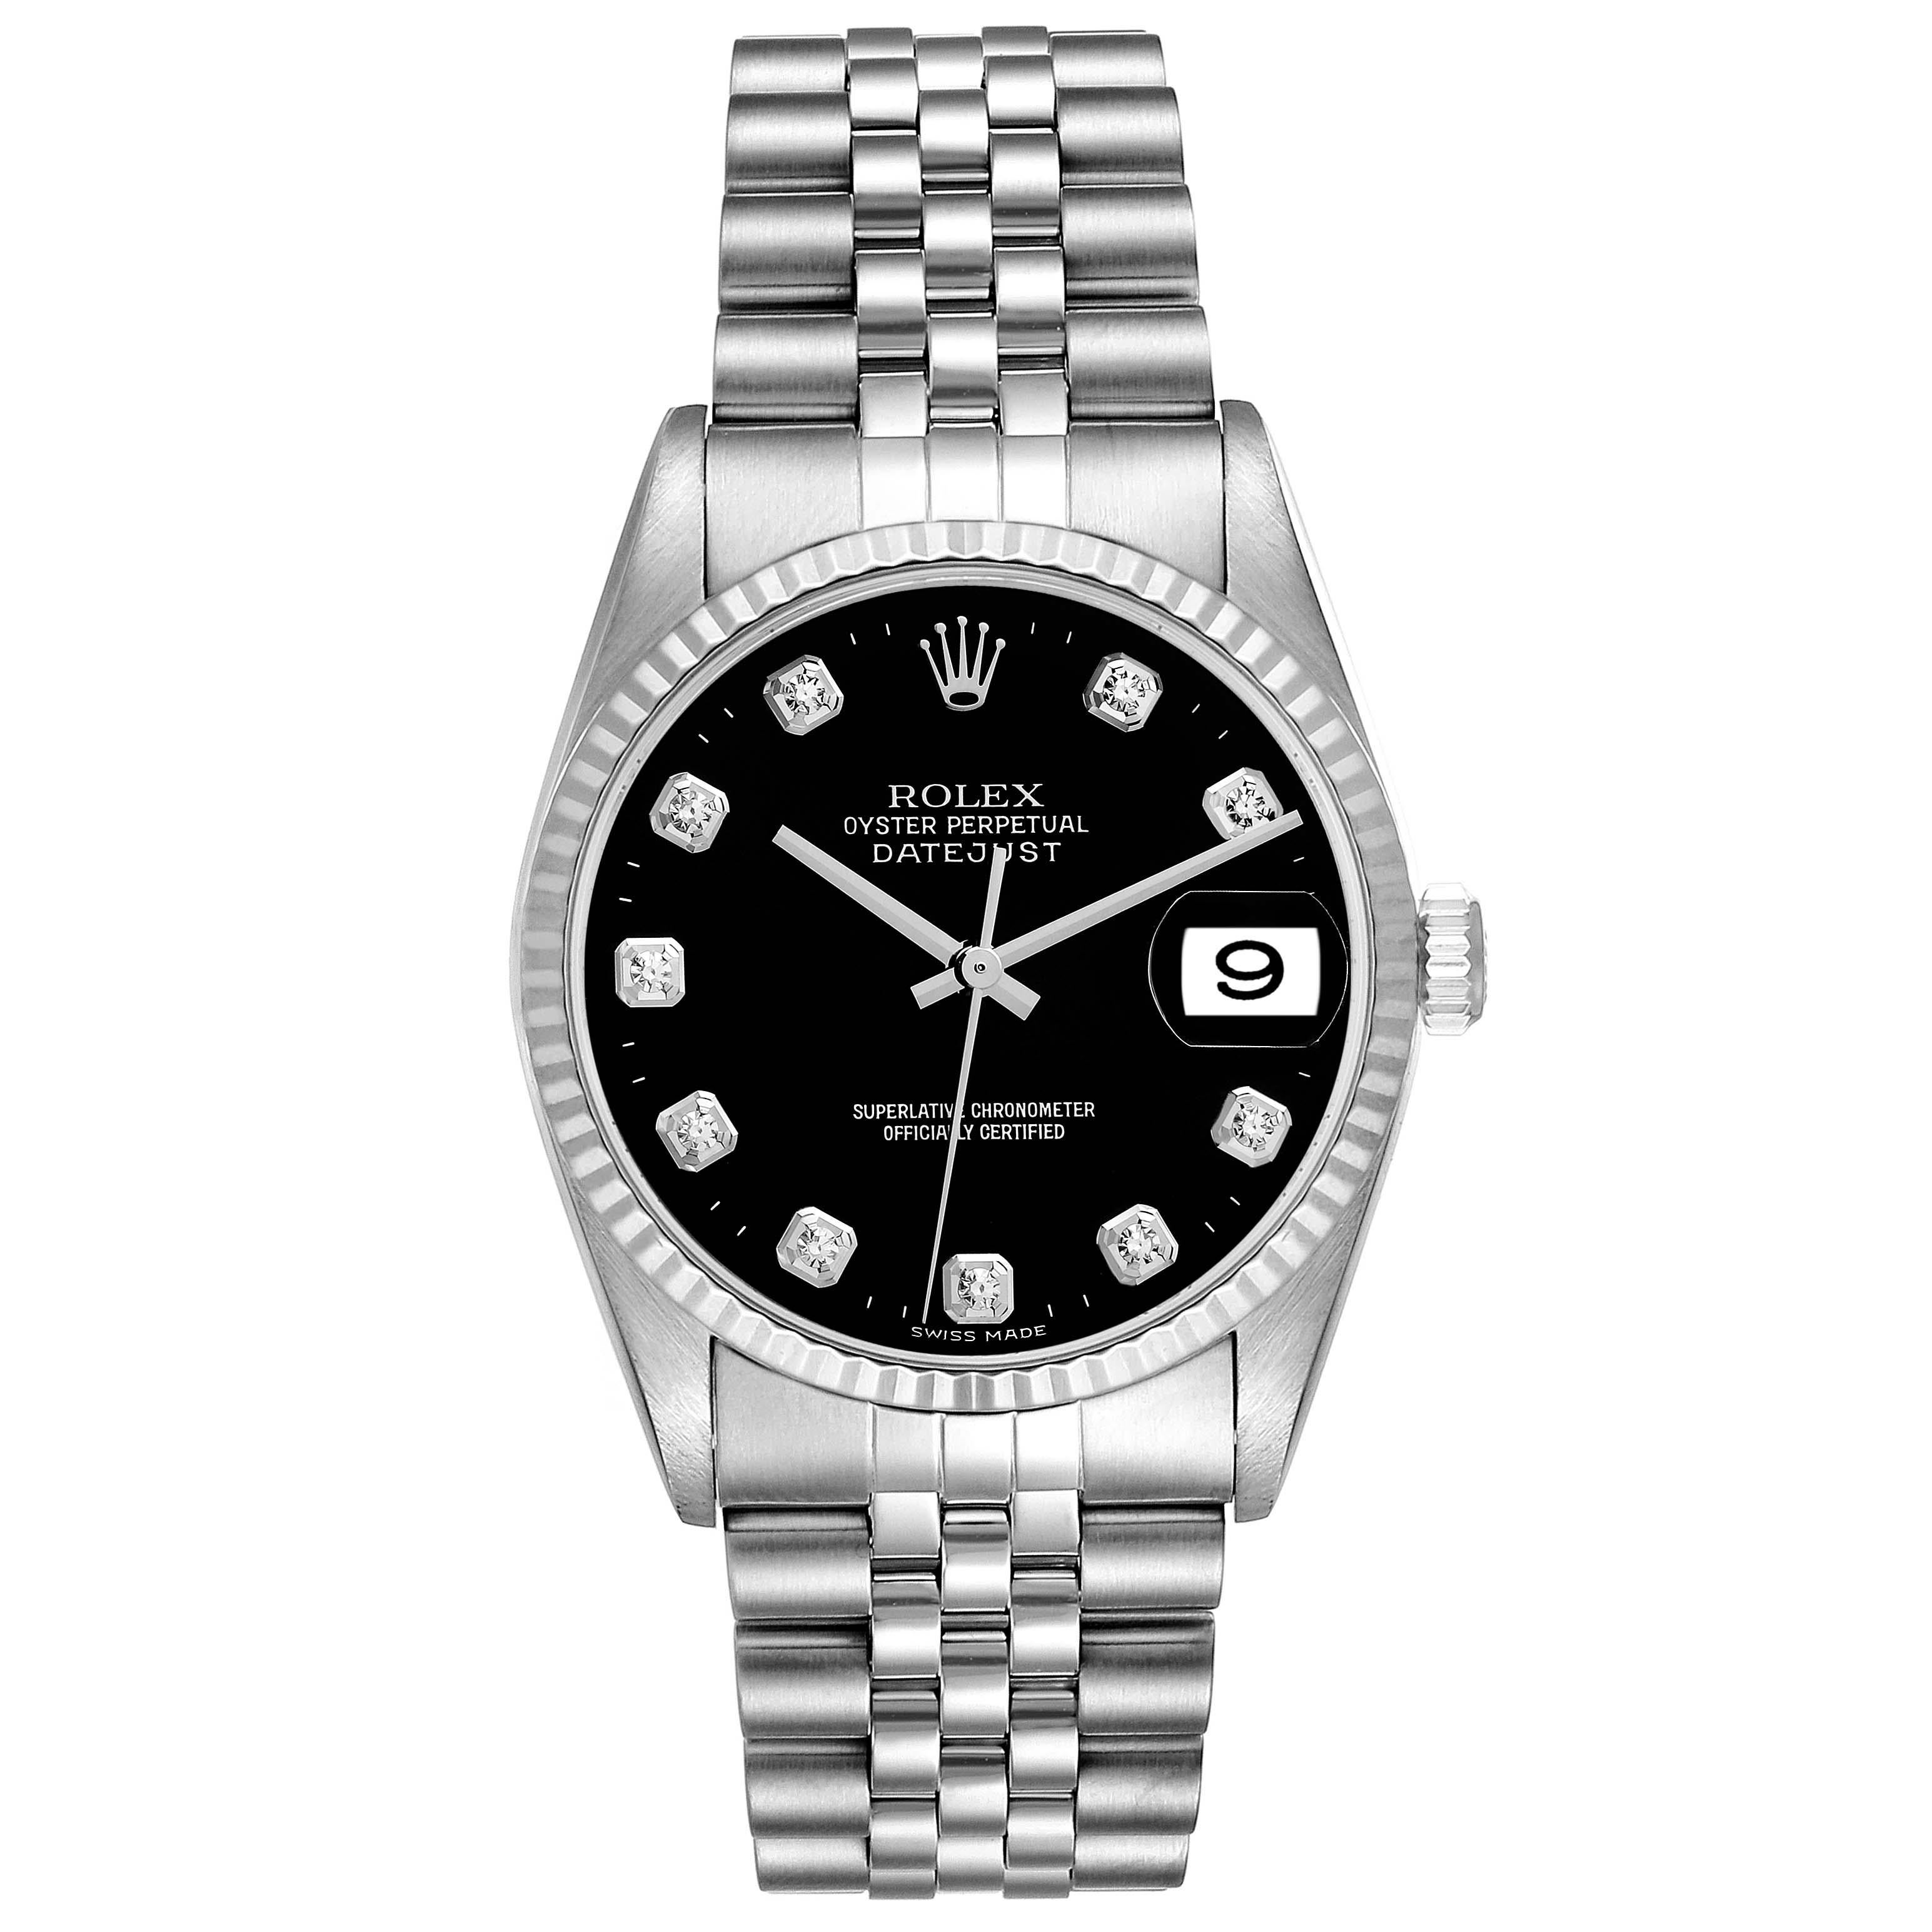 Rolex Datejust Steel White Gold Black Diamond Dial Mens Watch 16234. Officially certified chronometer automatic self-winding movement. Stainless steel case 36.0 mm in diameter. Rolex logo on the crown. 18K white gold fluted bezel. Scratch resistant